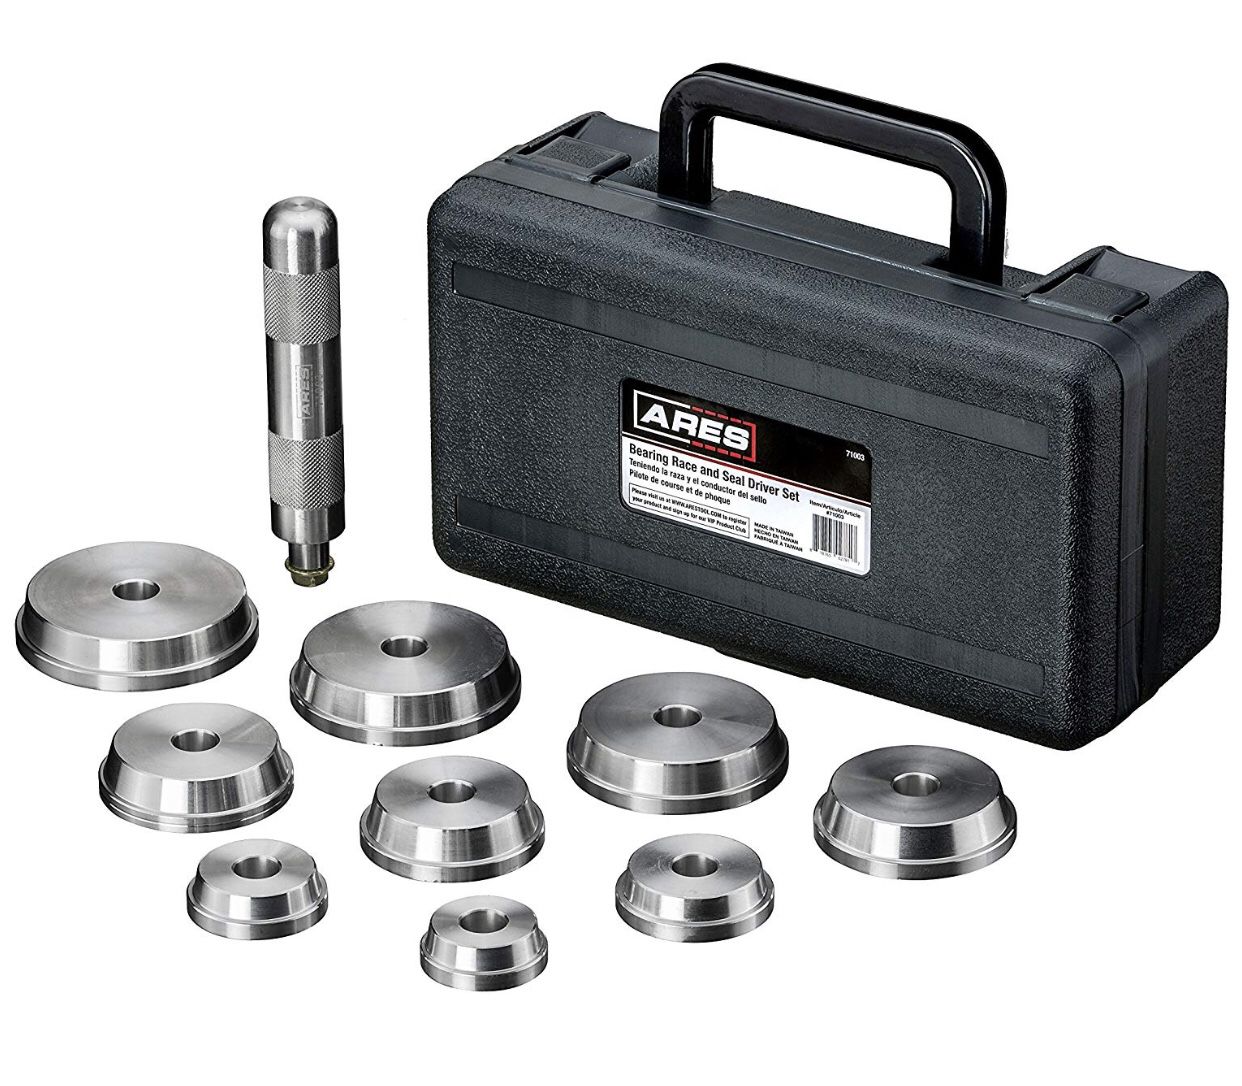 A RES 71003 - Bearing Race and Seal Driver Set - Universal Kit Allows for Easy Race and Seal Installation - Storage Case Included